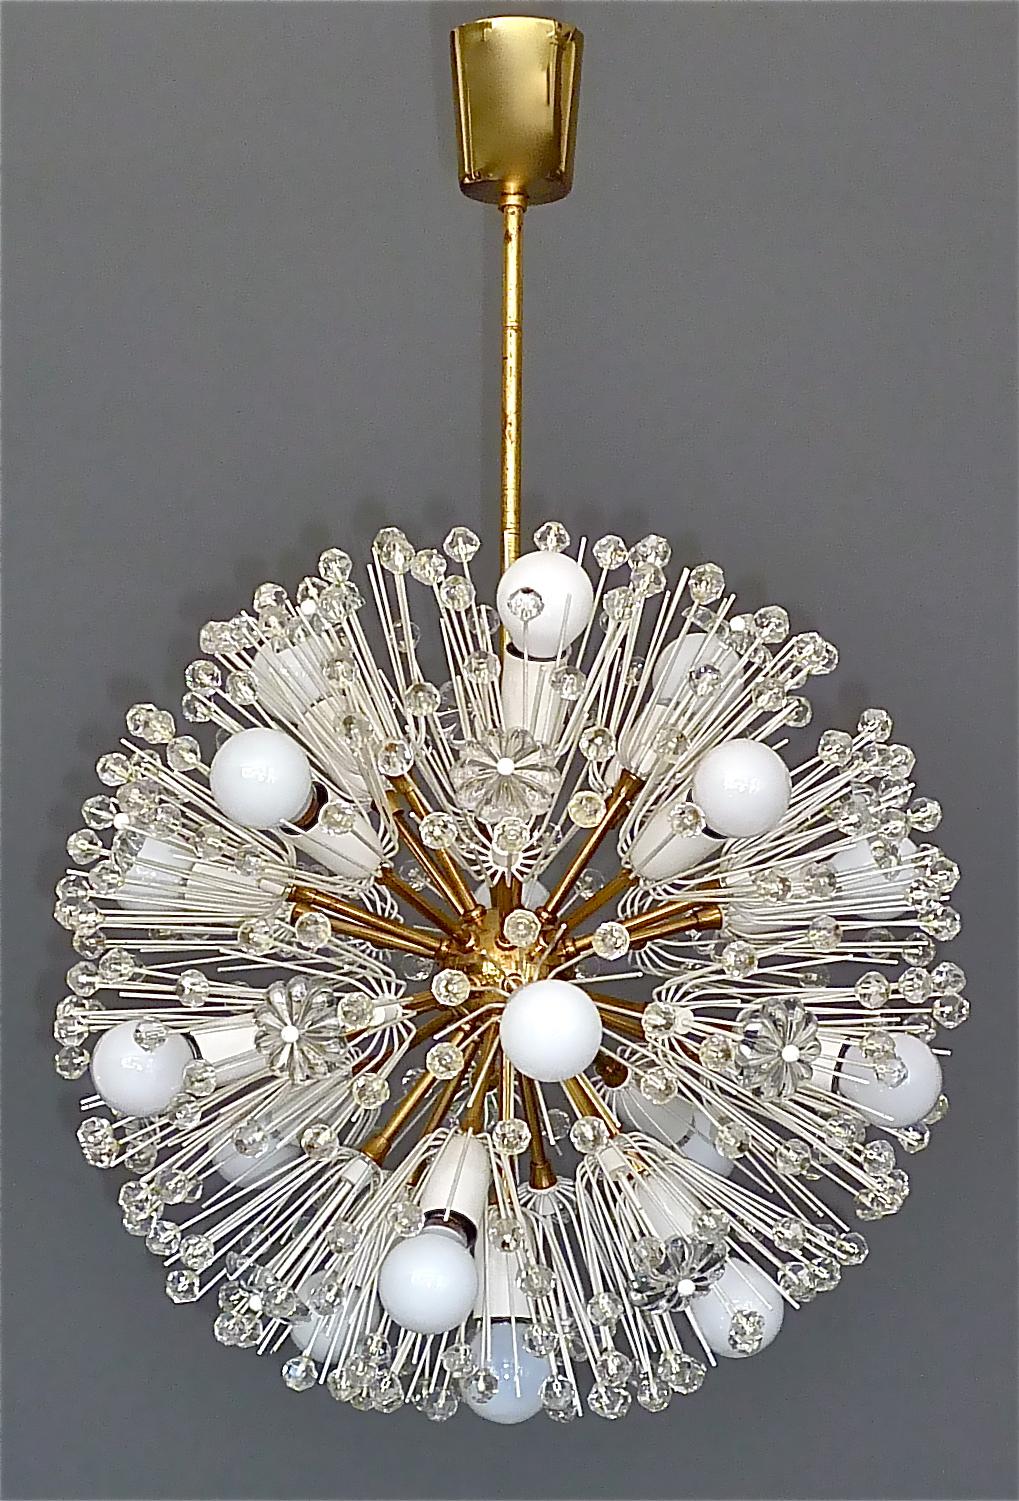 Fantastic large seventeen-light midcentury dandelion sputnik chandelier from the Pyra series designed by Emil Stejnar and executed by Rupert Nikoll, Vienna, Austria, circa 1955. The beautiful pendant lamp is made of patinated brass, white painted